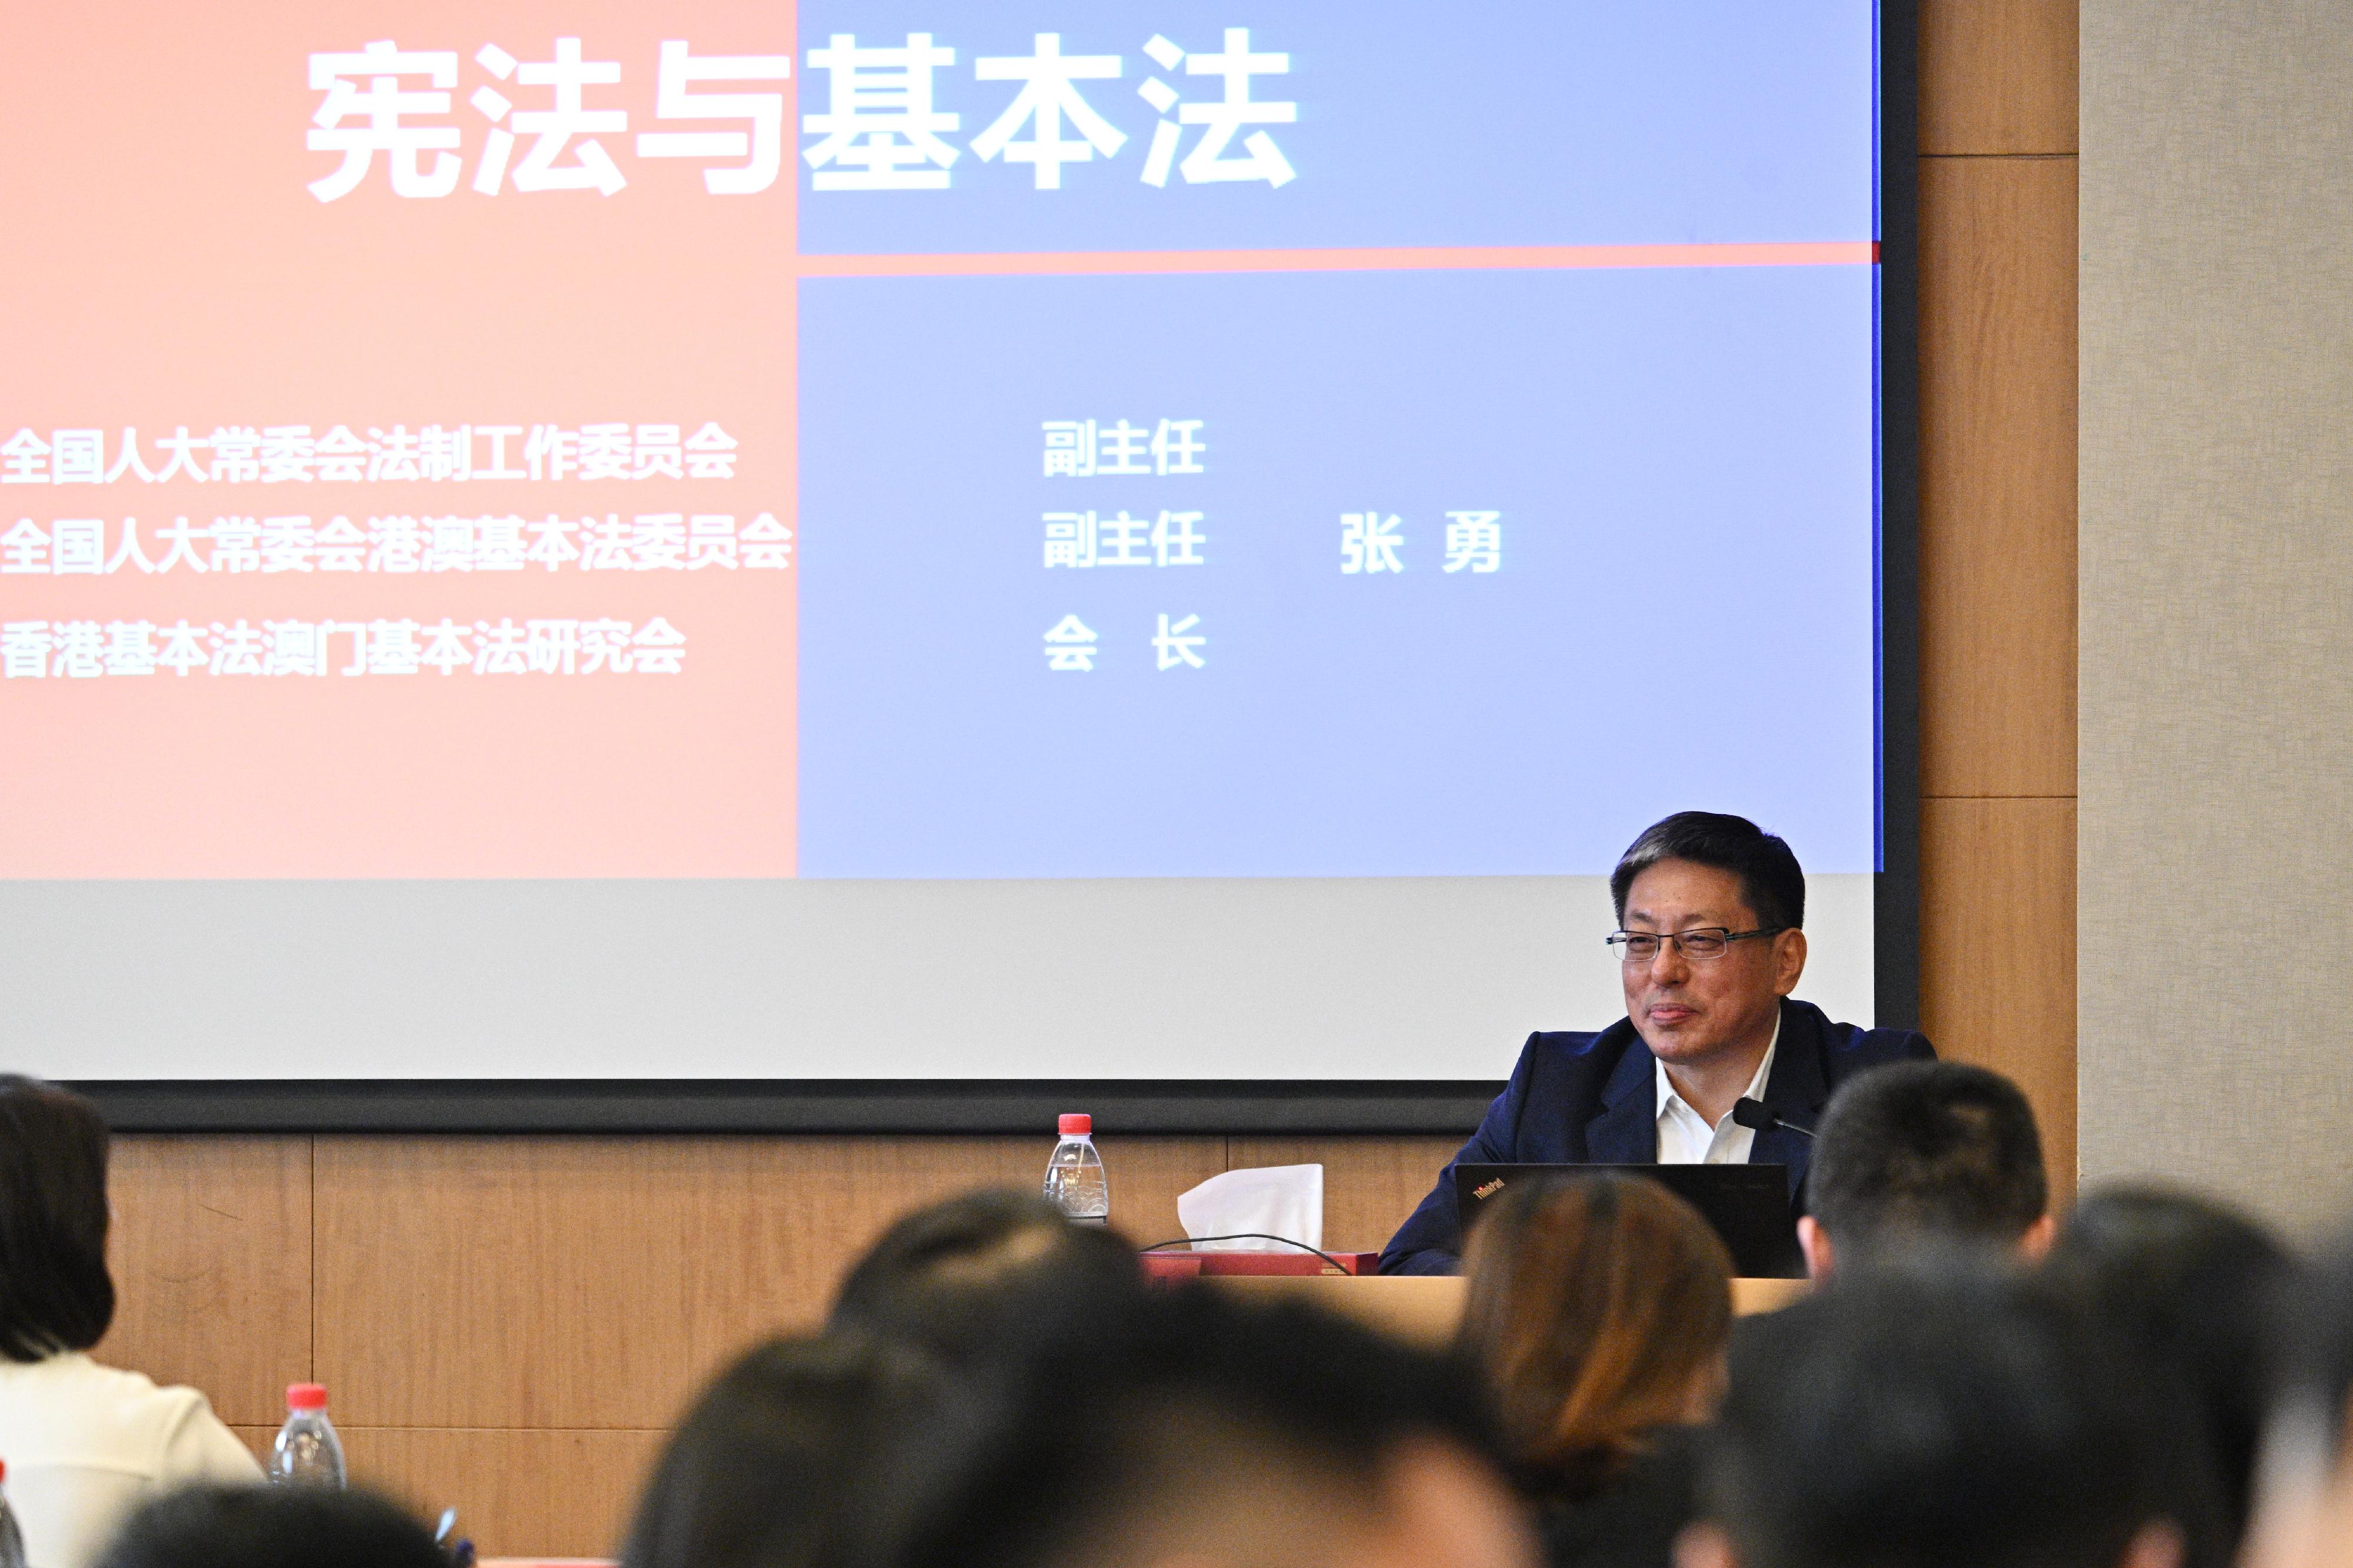 The Deputy Director of the Legislative Affairs Commission and the Basic Law Committee of the Hong Kong and Macao Special Administrative Regions of the Standing Committee of the National People's Congress, Mr Zhang Yong, yesterday (November 20) afternoon gave a lecture to politically appointed officials on the Constitution and the Basic Law of the Hong Kong Special Administrative Region.